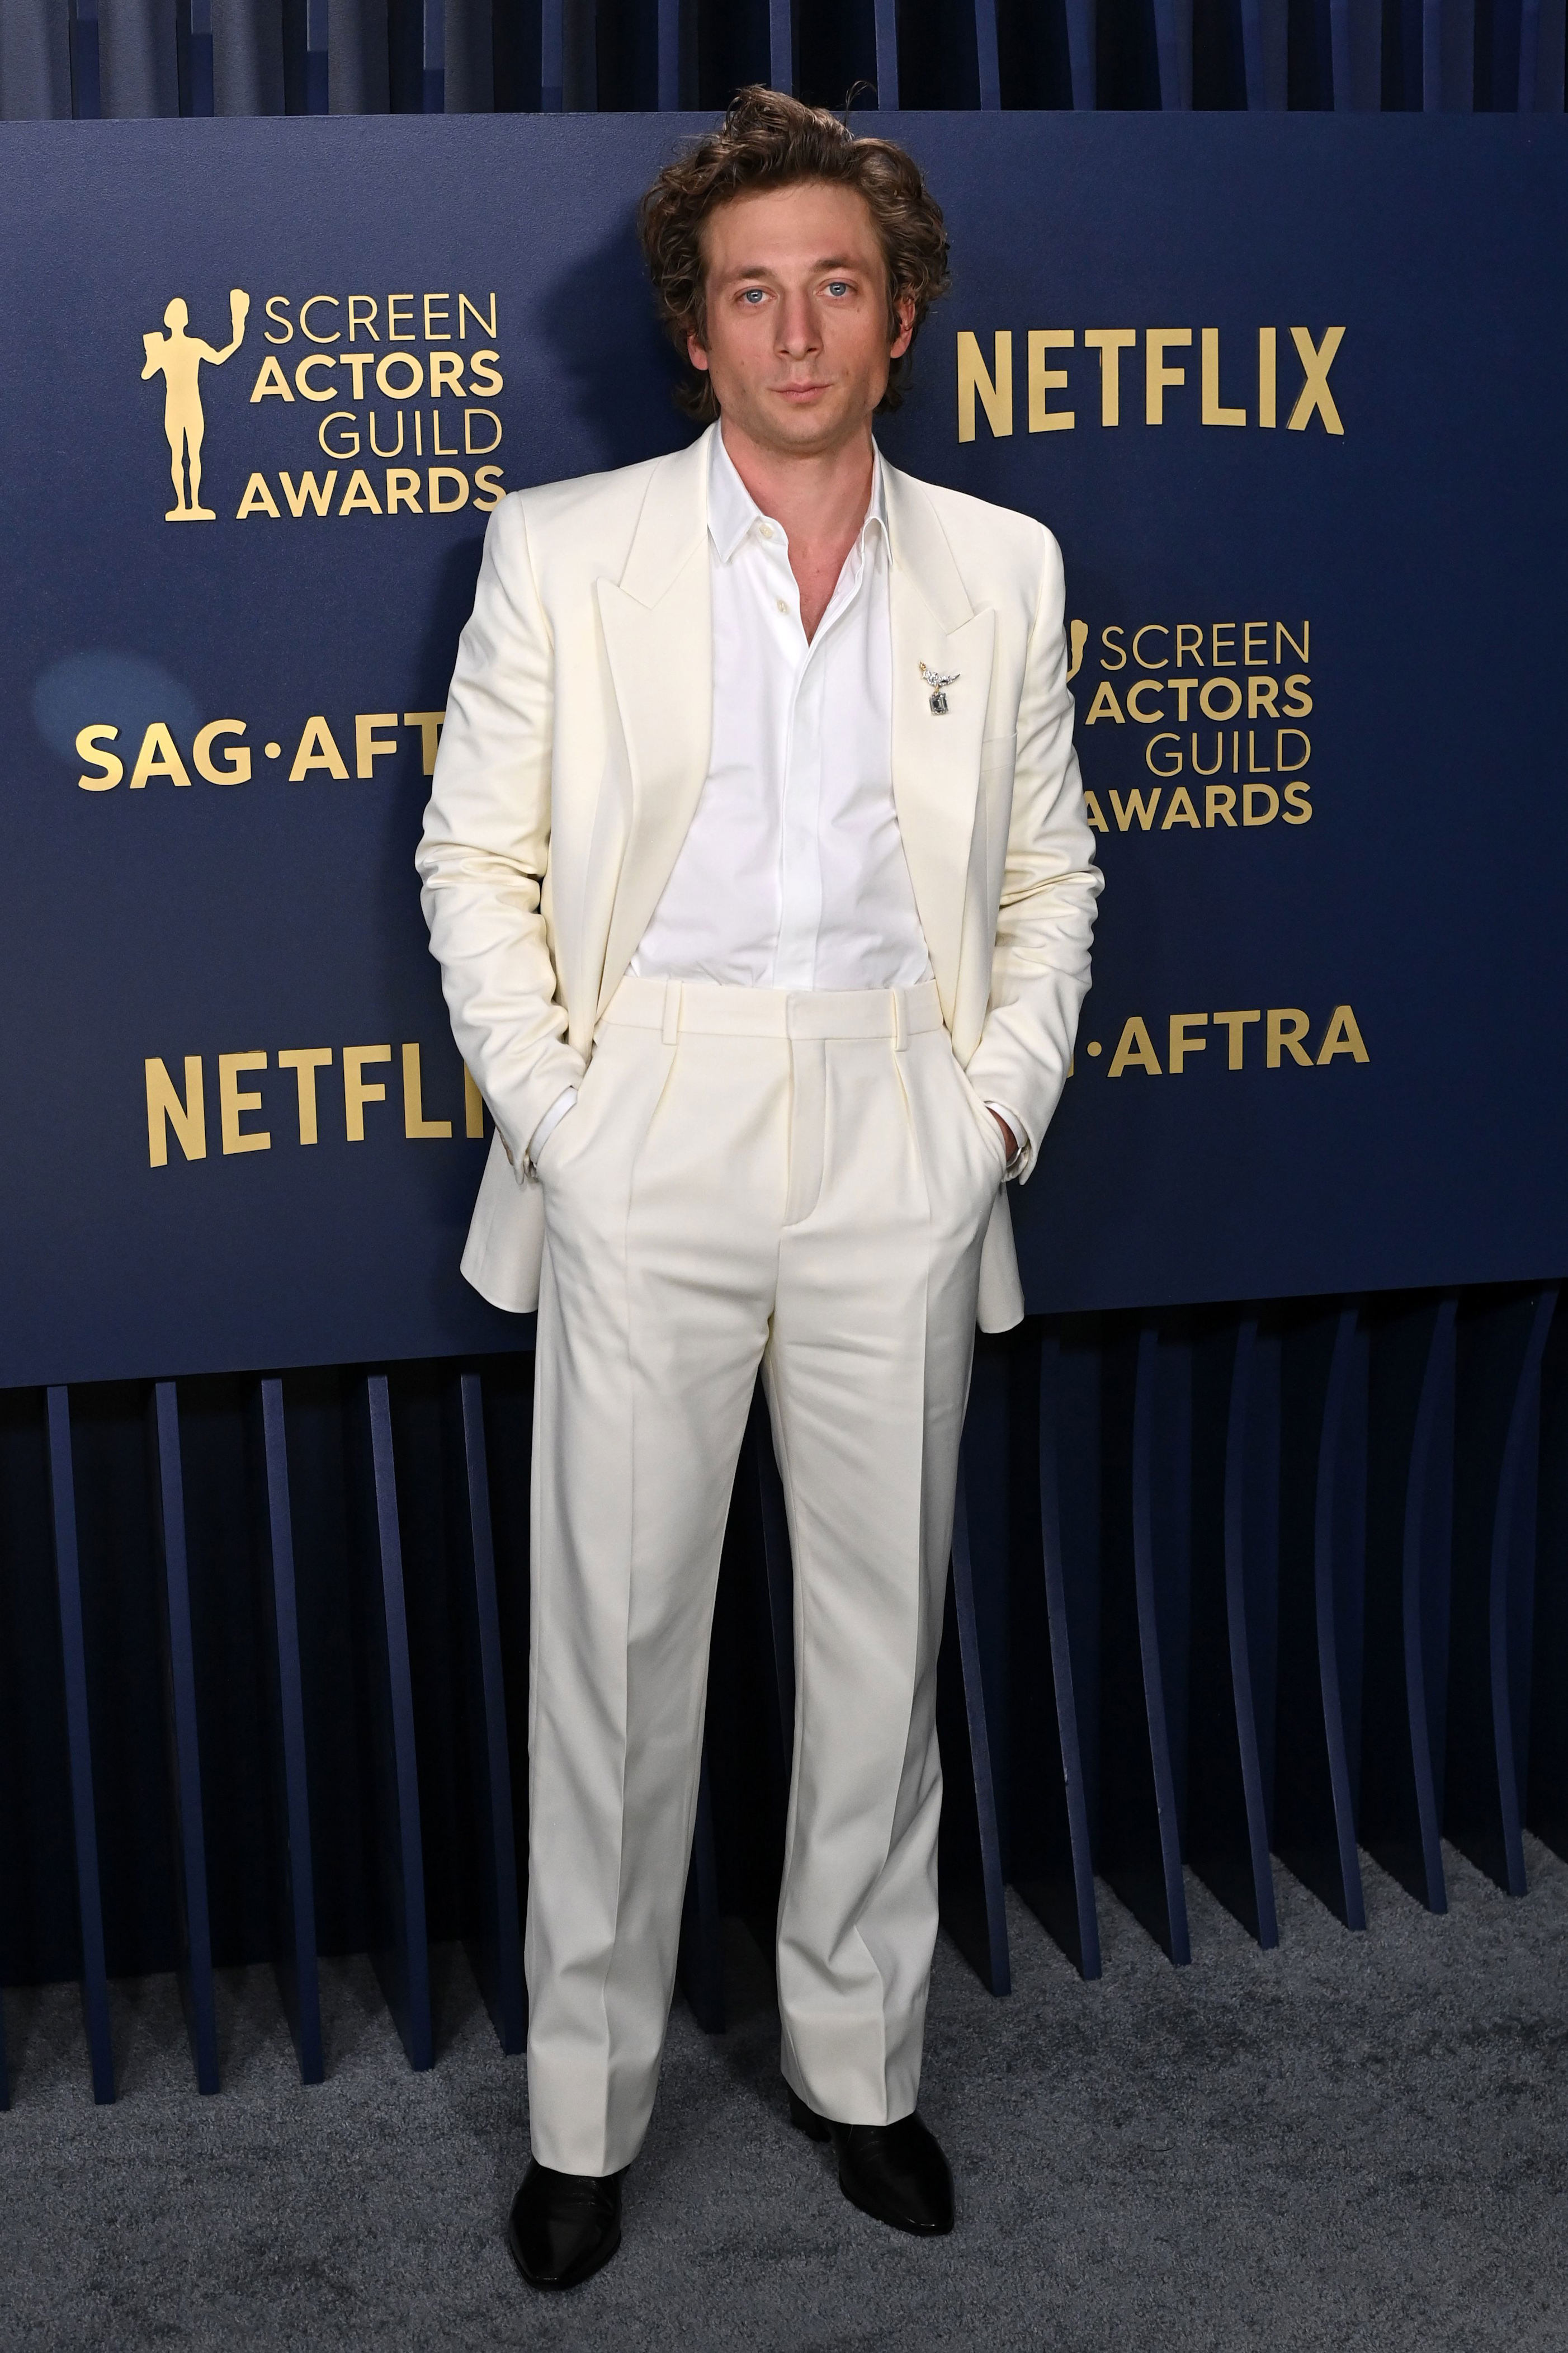 18 impressive looks from the men at this year's SAG Awards